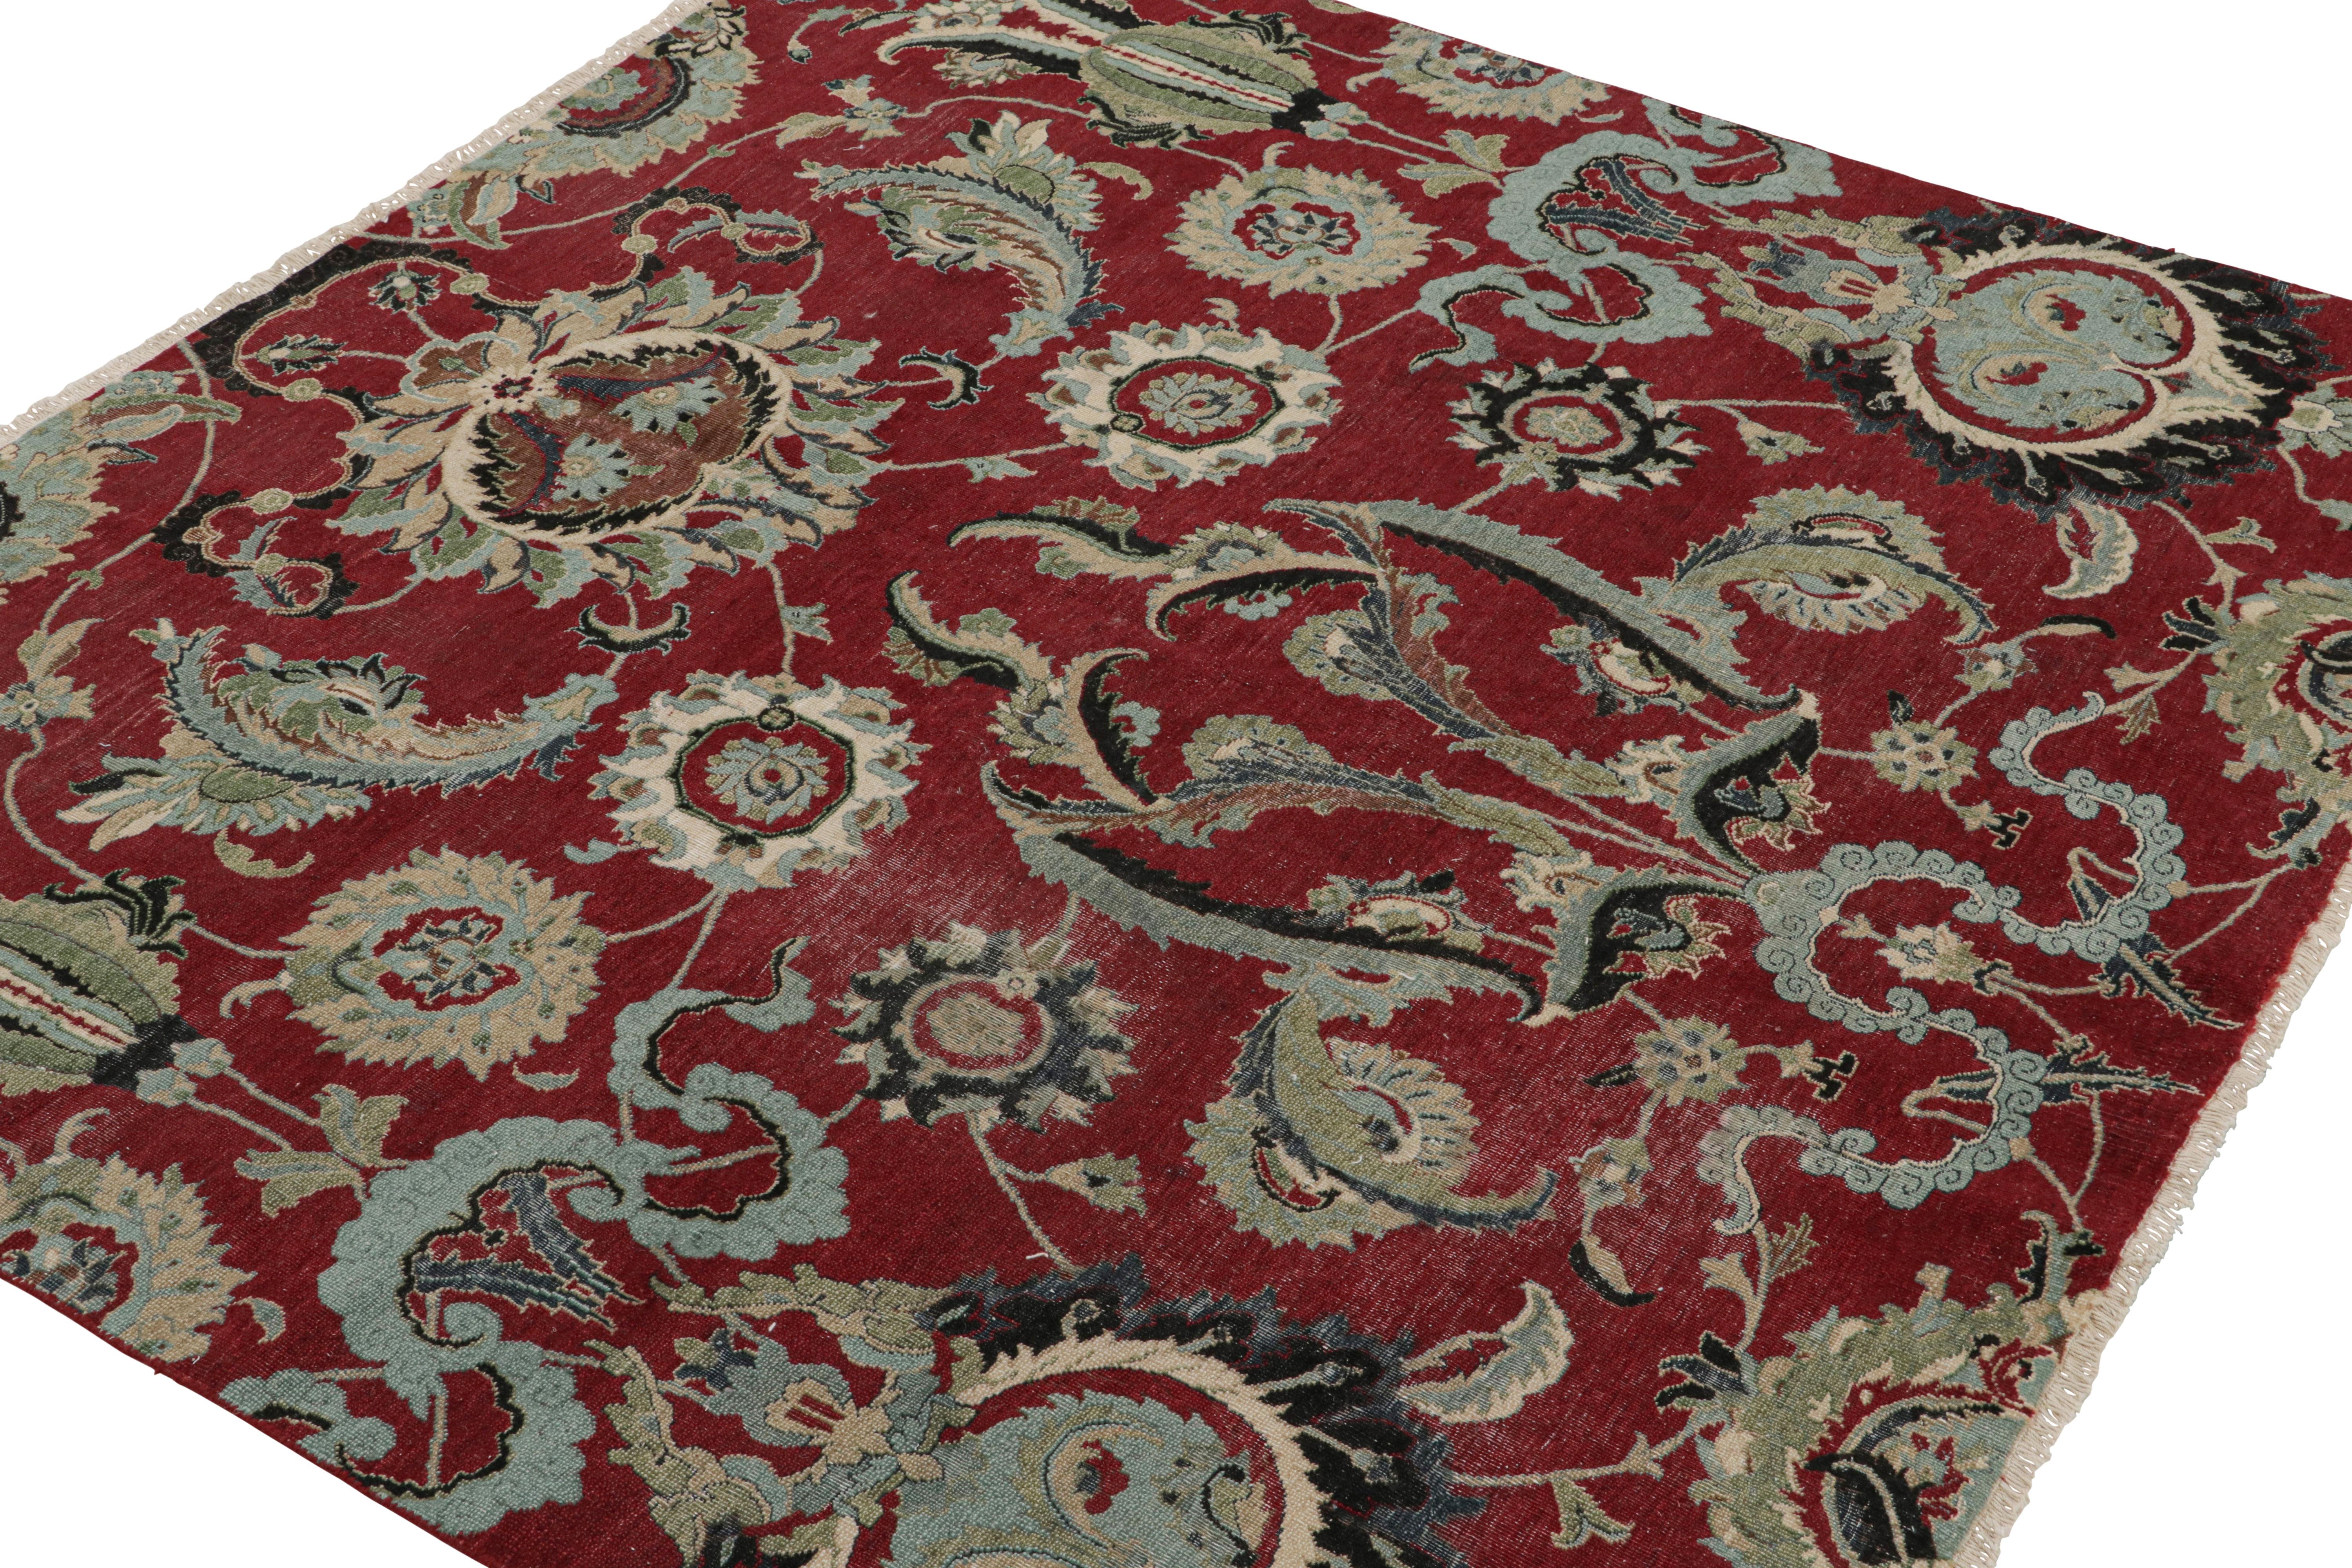 Indian Rug & Kilim’s Persian Isfahan Style Square Rug in Burgundy with Floral Patterns For Sale